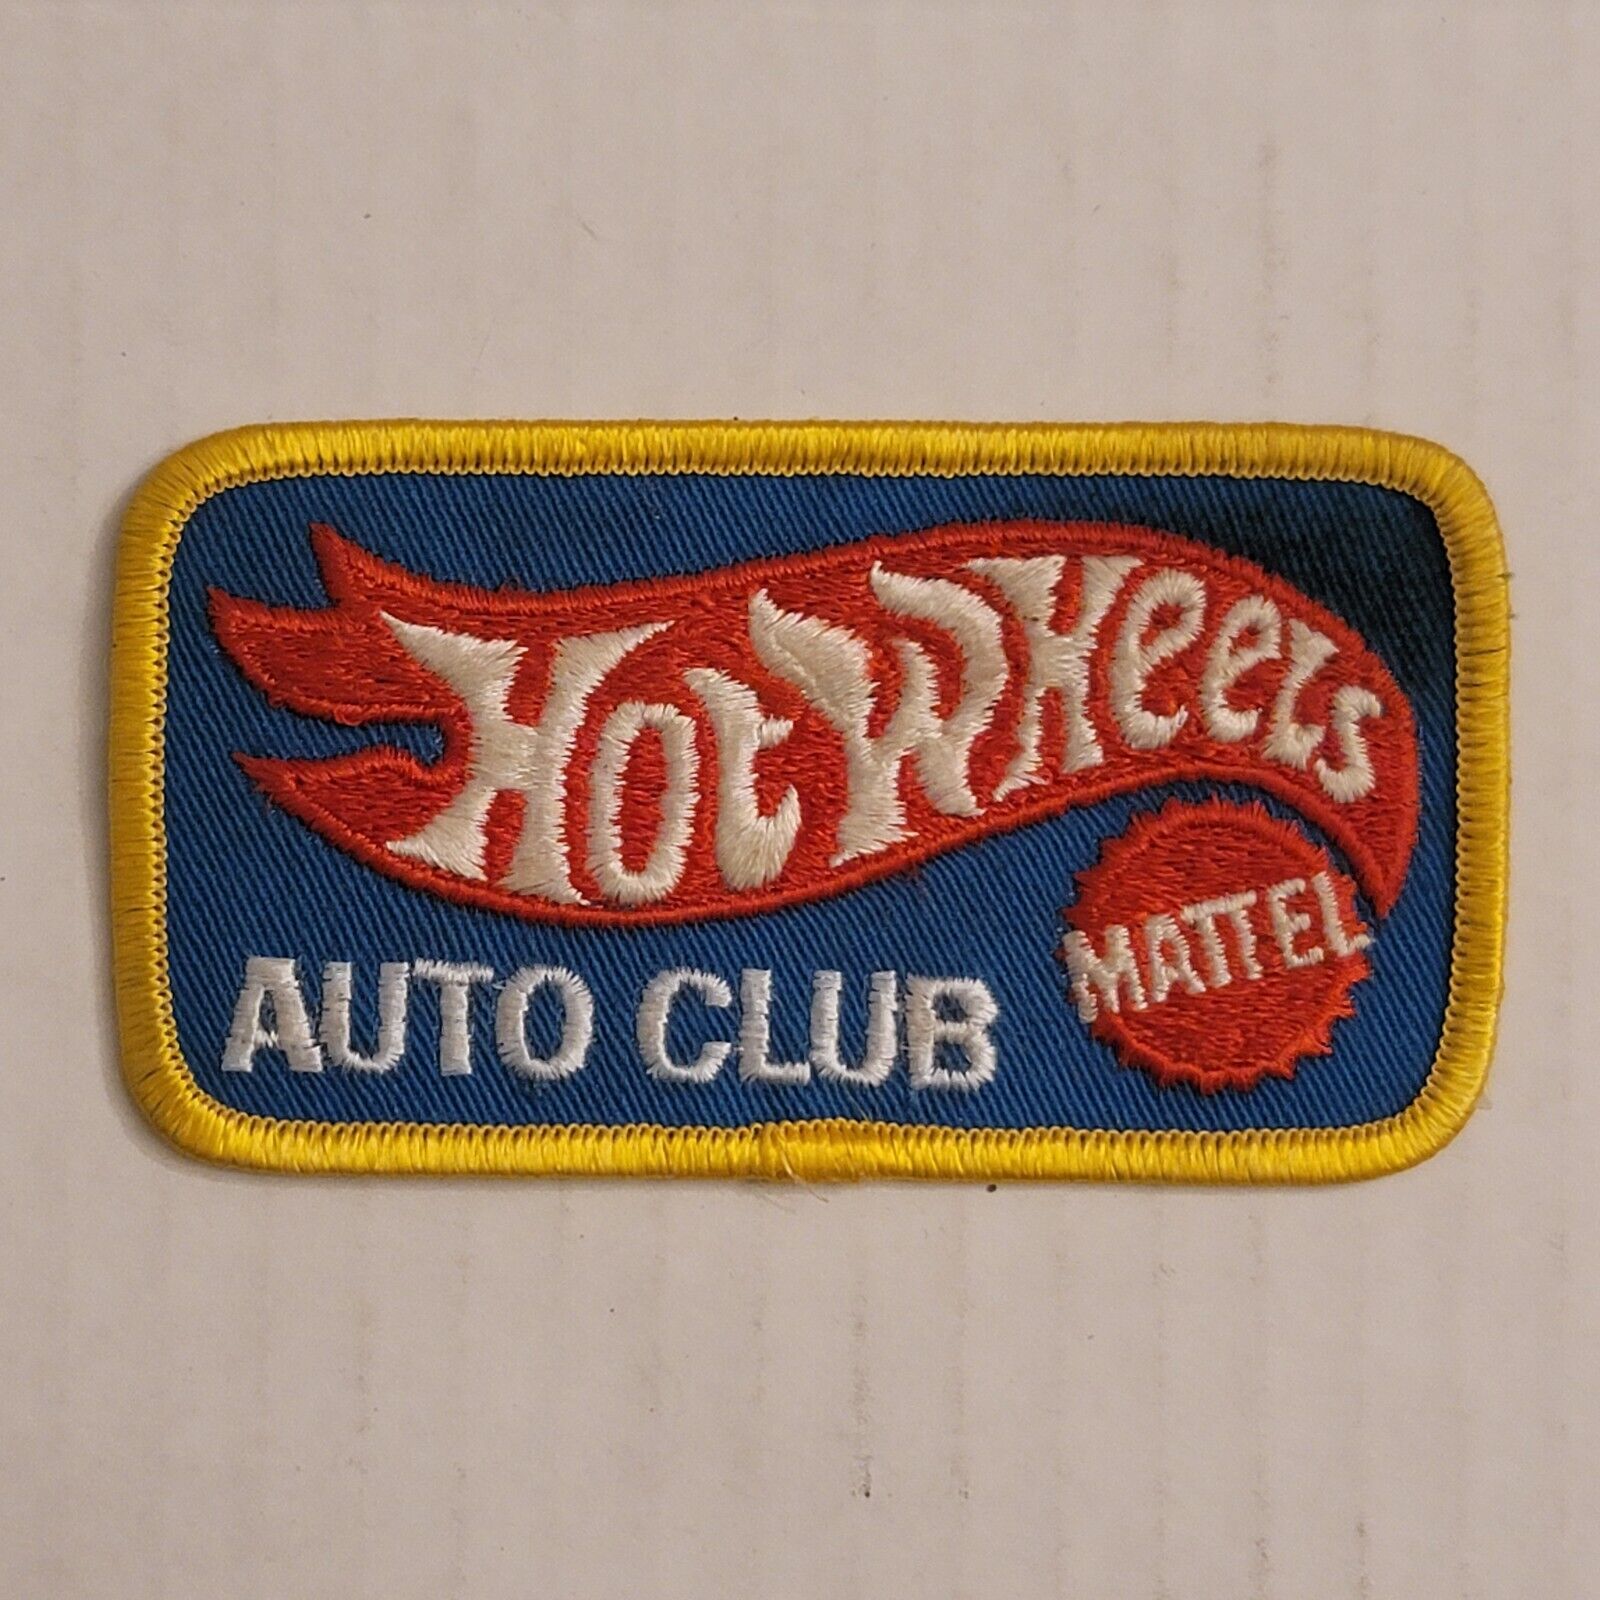 Vintage Hot Wheels Auto Club Patch Sew On Hat Jacket Shirt 4.25 X 2.25 Inches